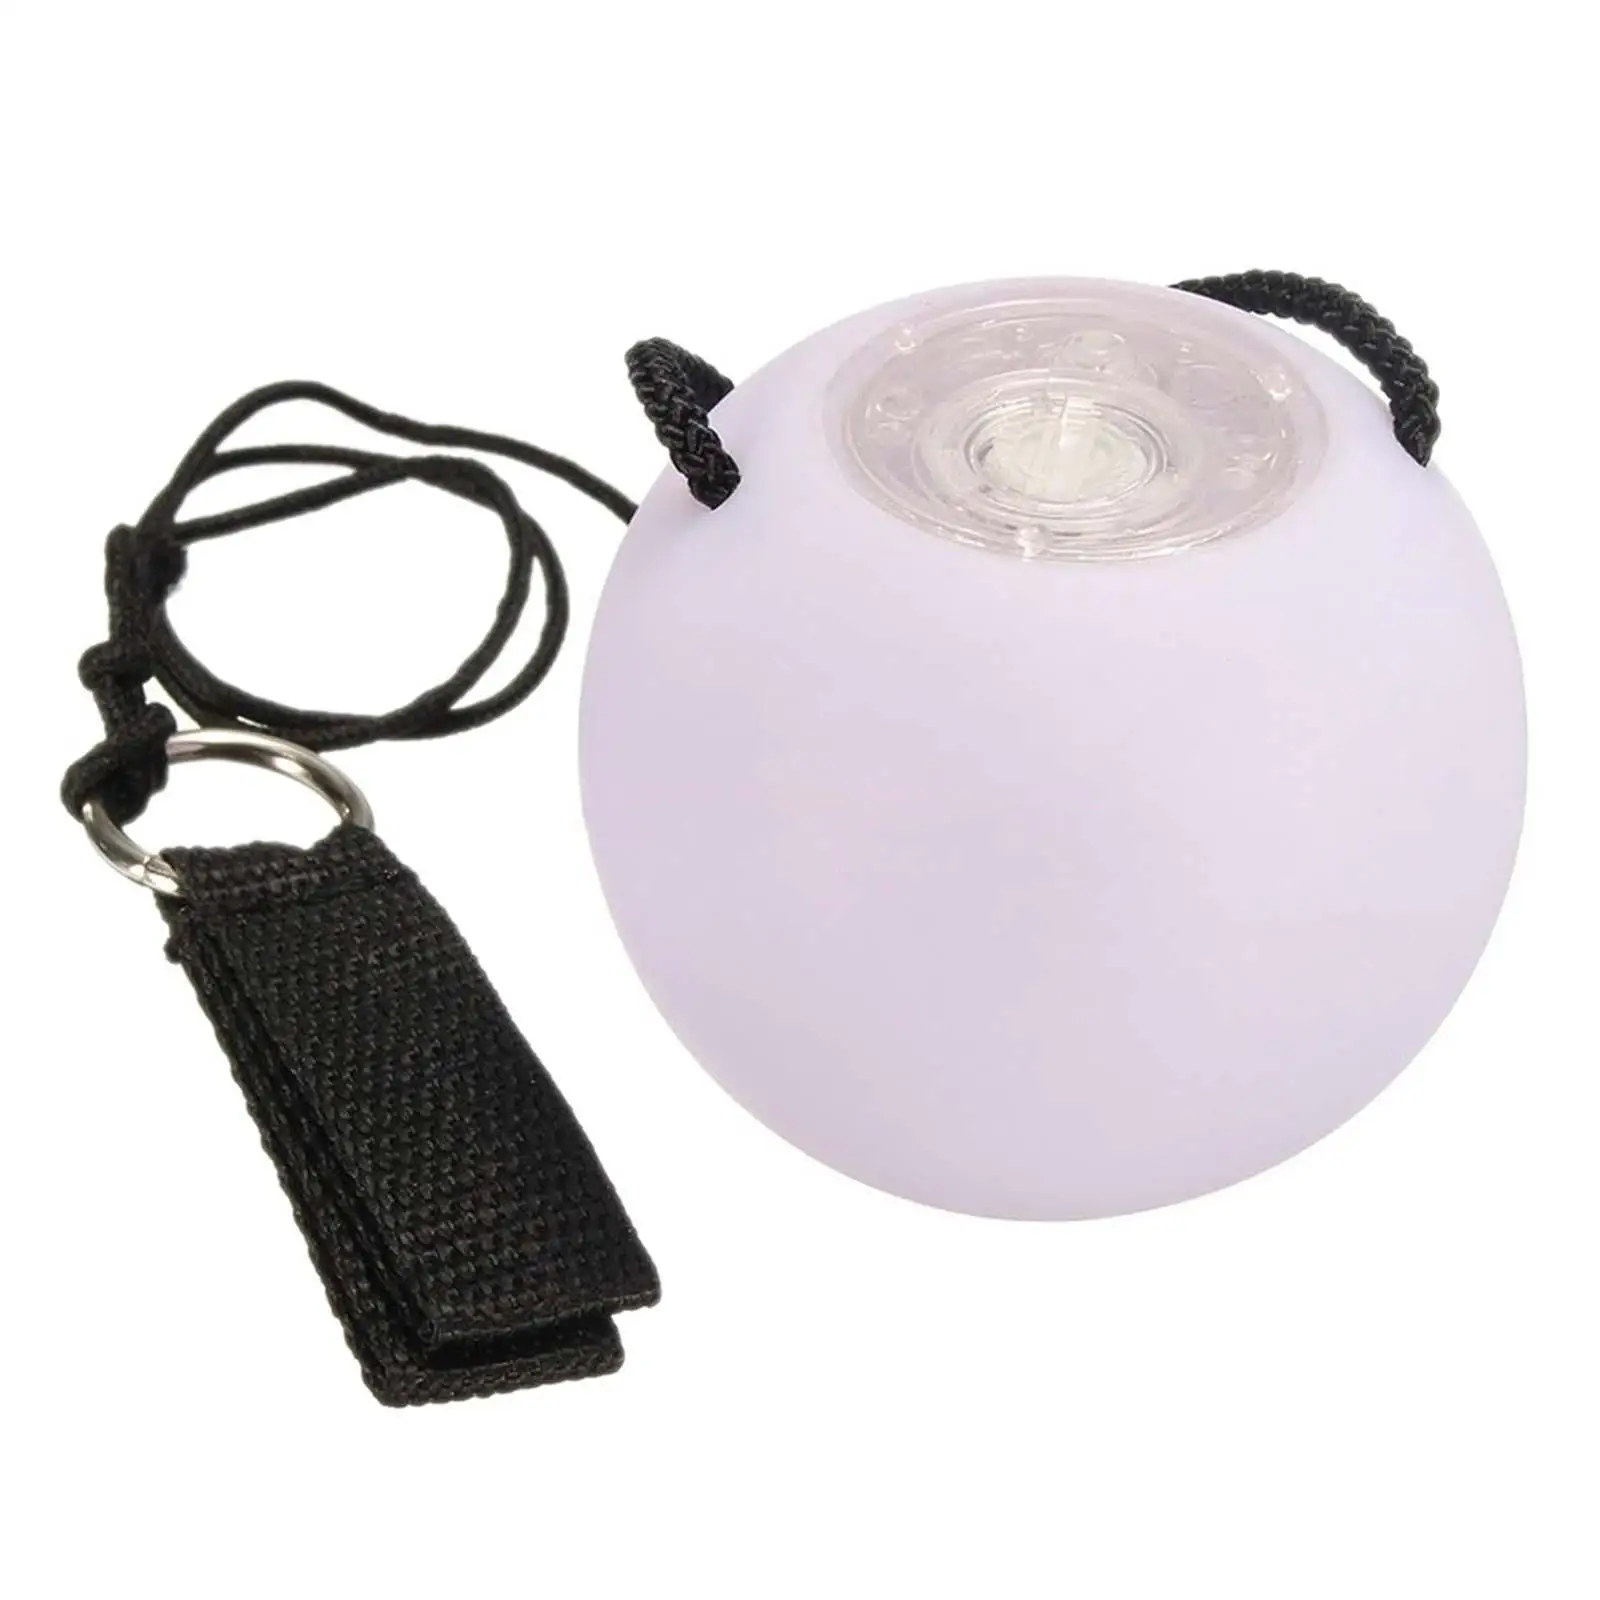 Ball Light up for Belly Dance Sports Hand Throwing Ball for Travel Picnic